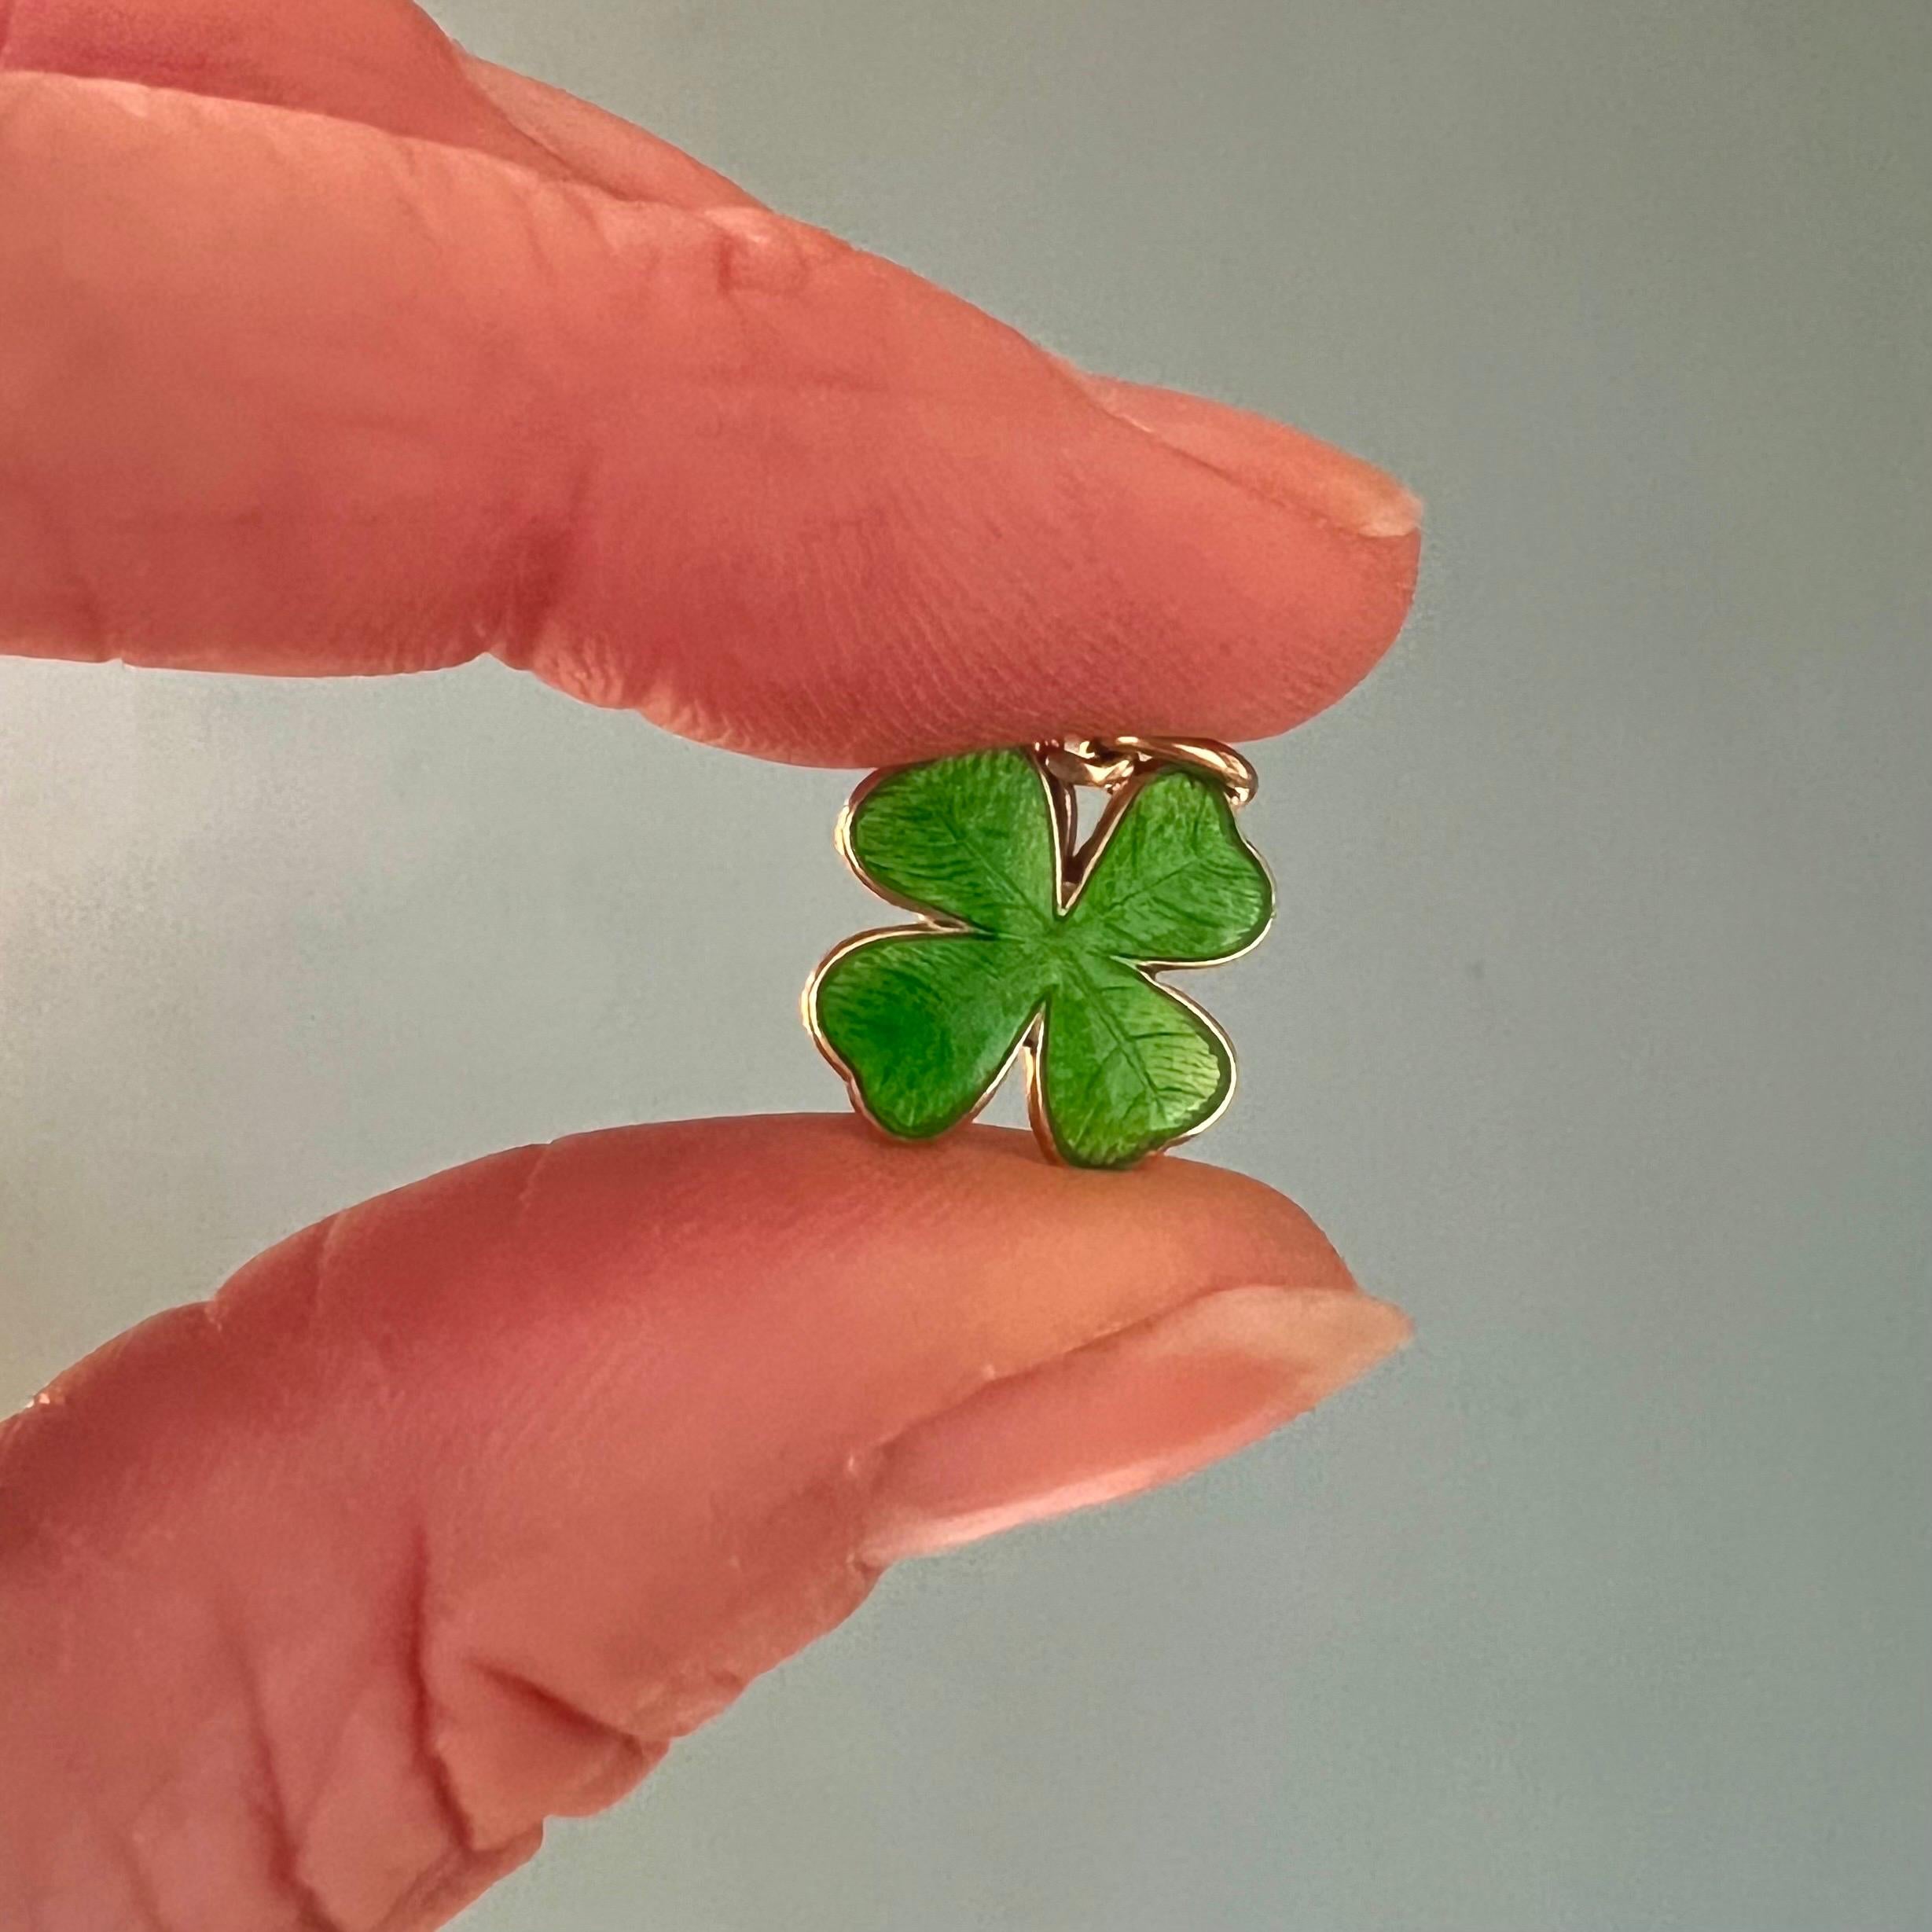 This is a 14 karat yellow gold enameled four clover leaf charm pendant. This lovely good luck pendant has a beautiful green enamel layer on top with a polished gold back and bail. 

Charms are great to collect as wearable memories, it has a symbolic